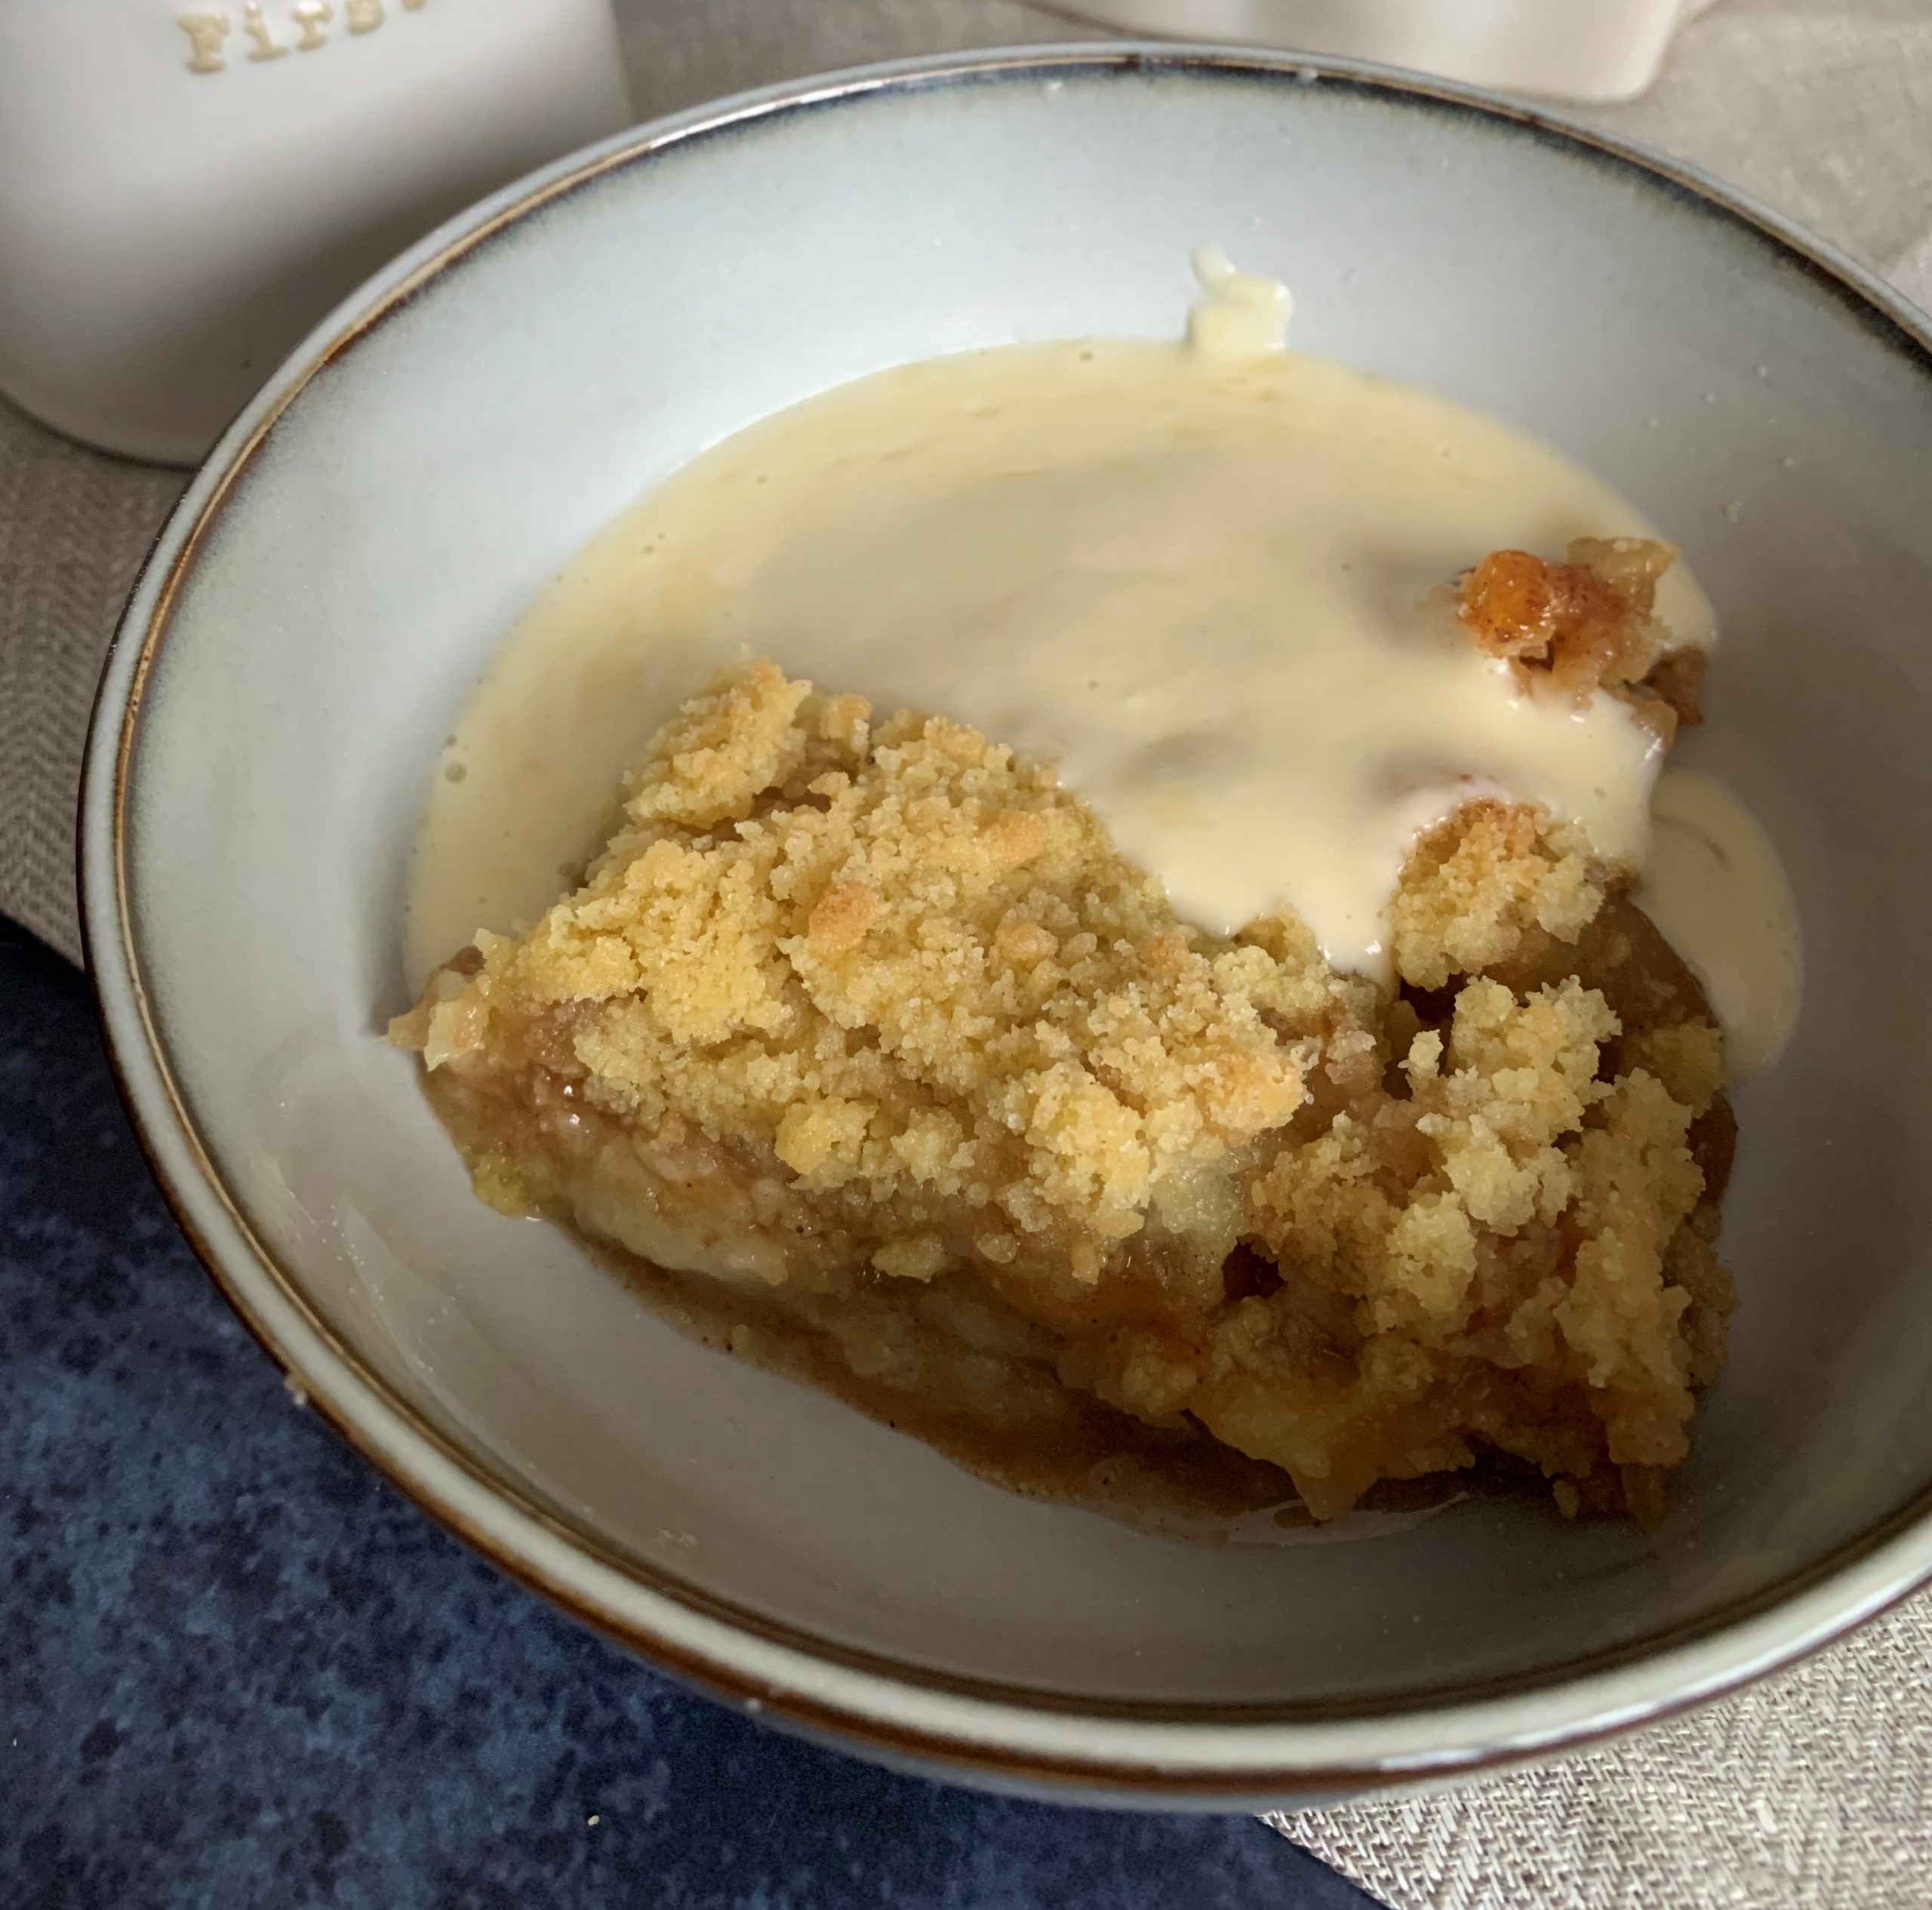 The Best Apple and Cinnamon Crumble recipe